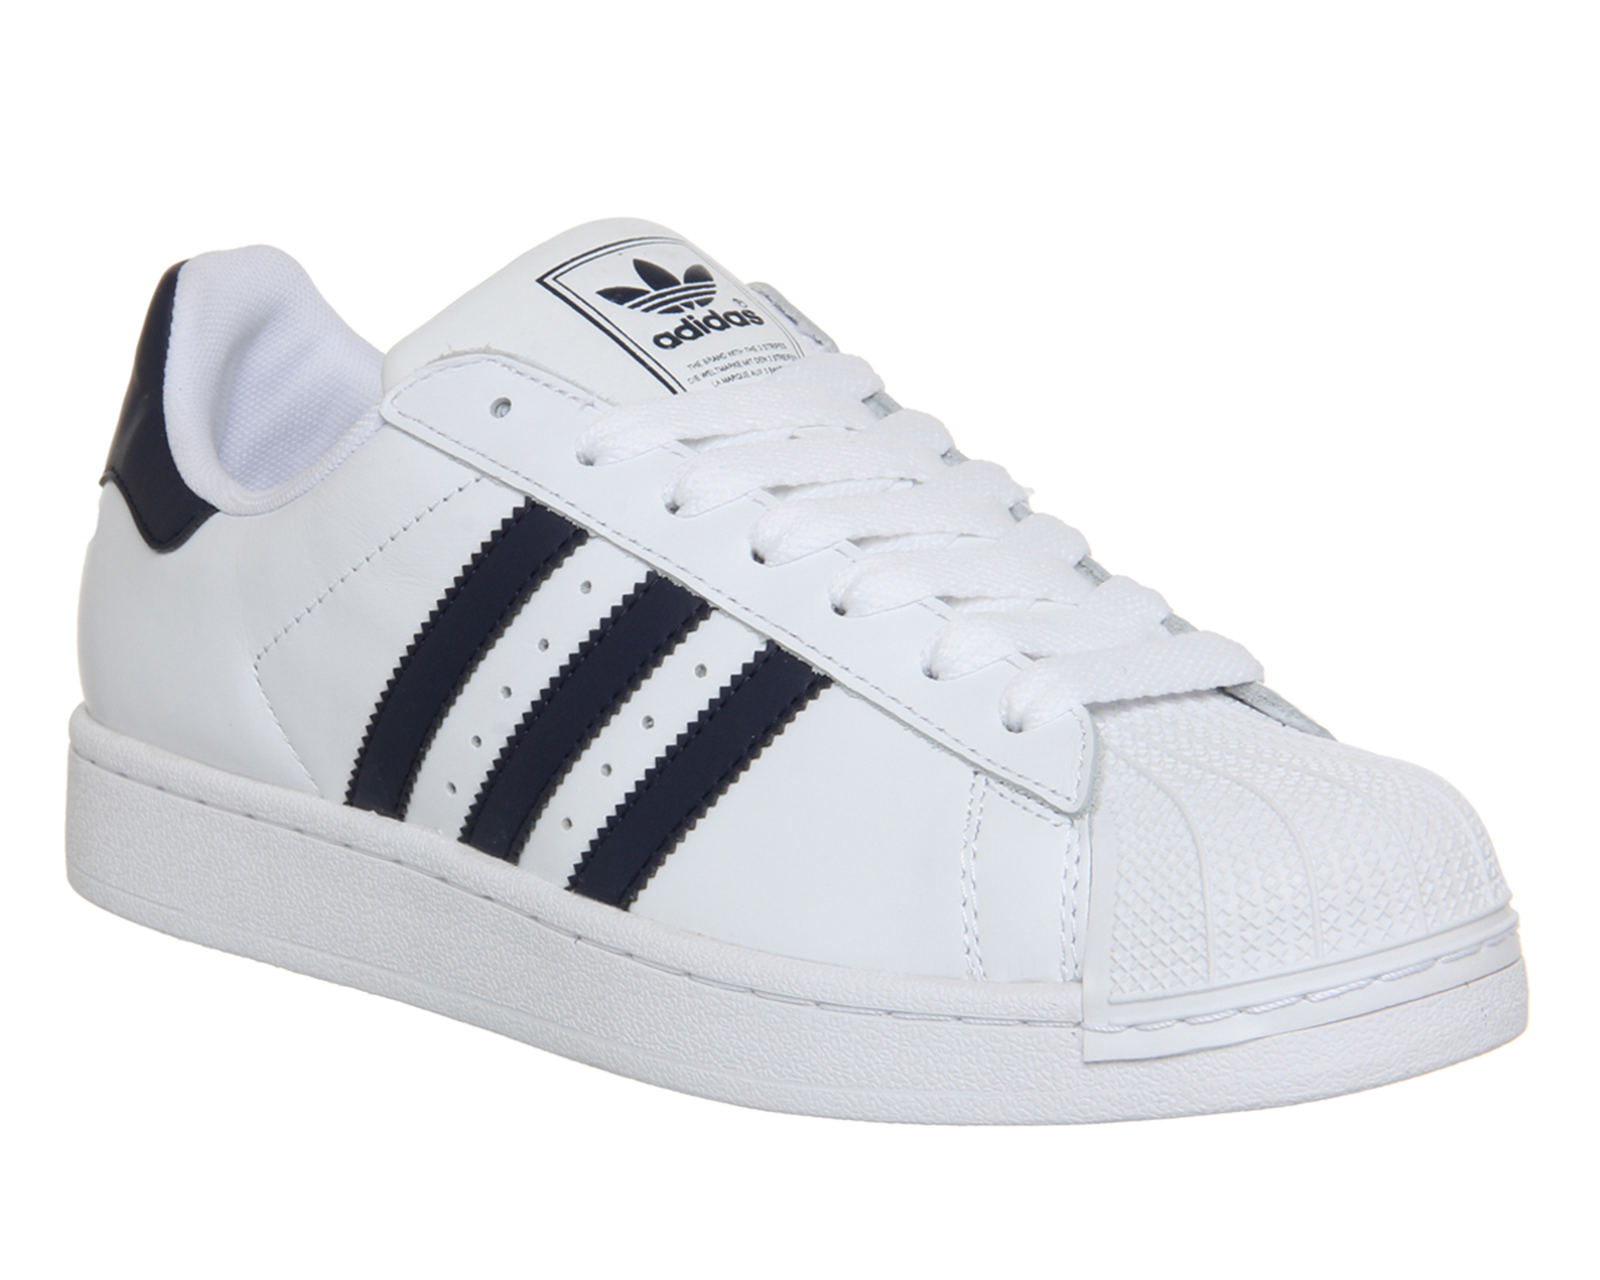 adidas Superstar II White Navy - His trainers